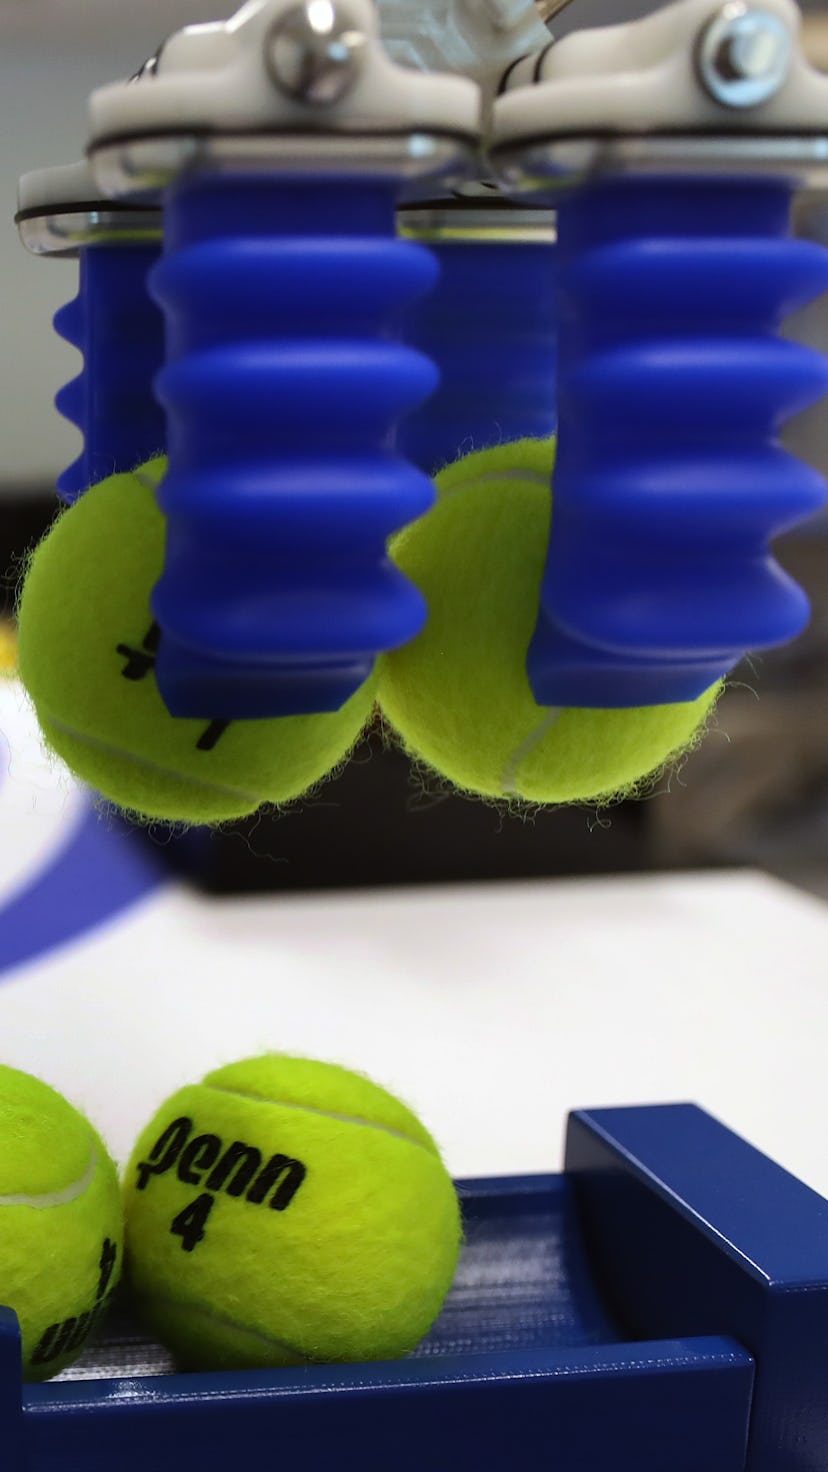 BEDFORD, MA - MAY 20: A soft robotics device works with tennis balls in Bedford, MA on May 20, 2019....